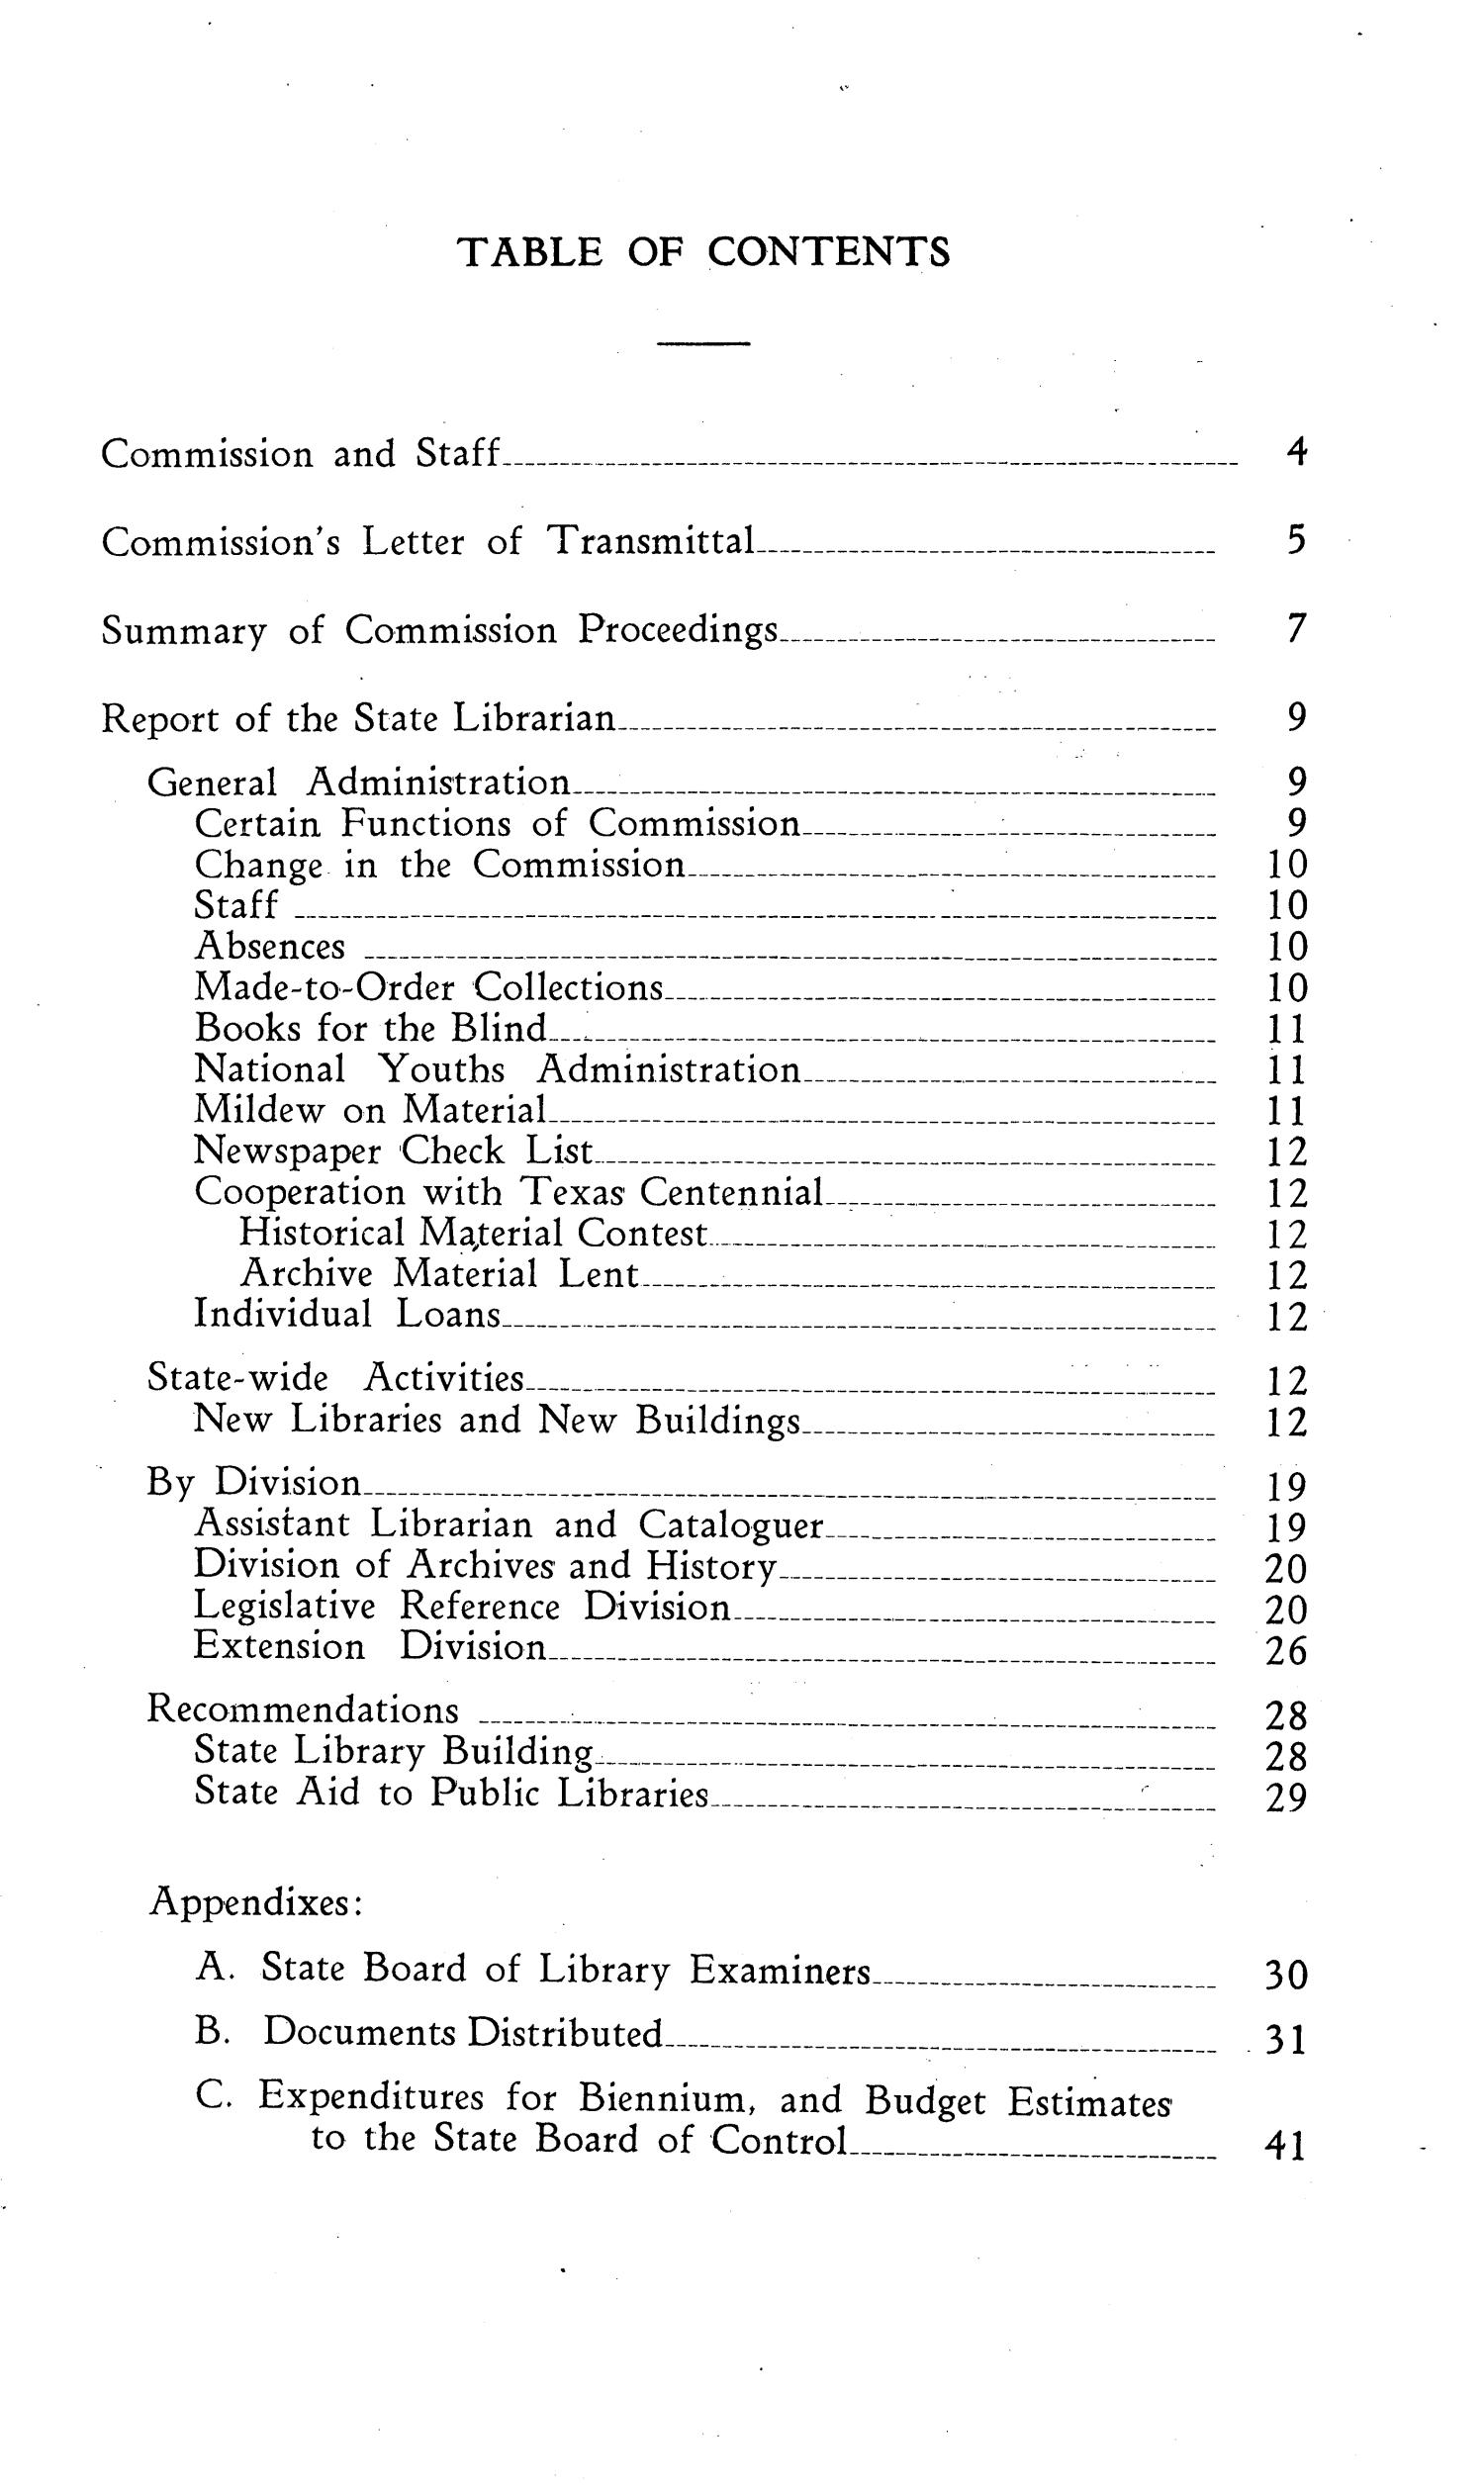 Biennial Report of the Texas Library and Historical Commission State Library: 1934-1936
                                                
                                                    TABLE OF CONTENTS
                                                